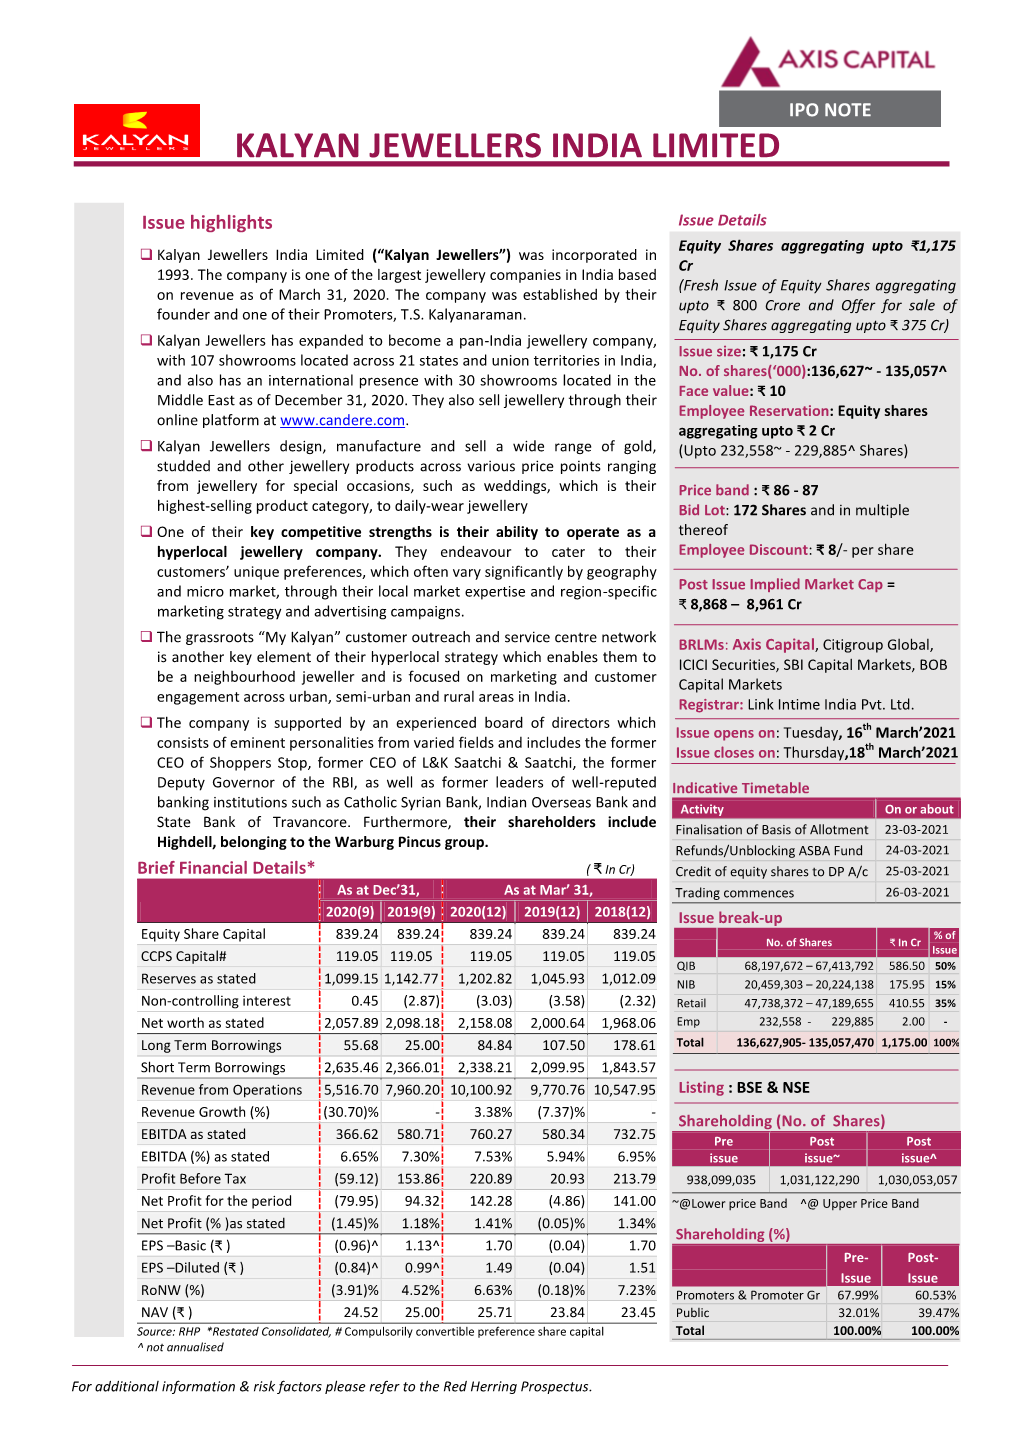 Kalyan-Jewellers-IPO-Note-Axis-Capital.Pdf